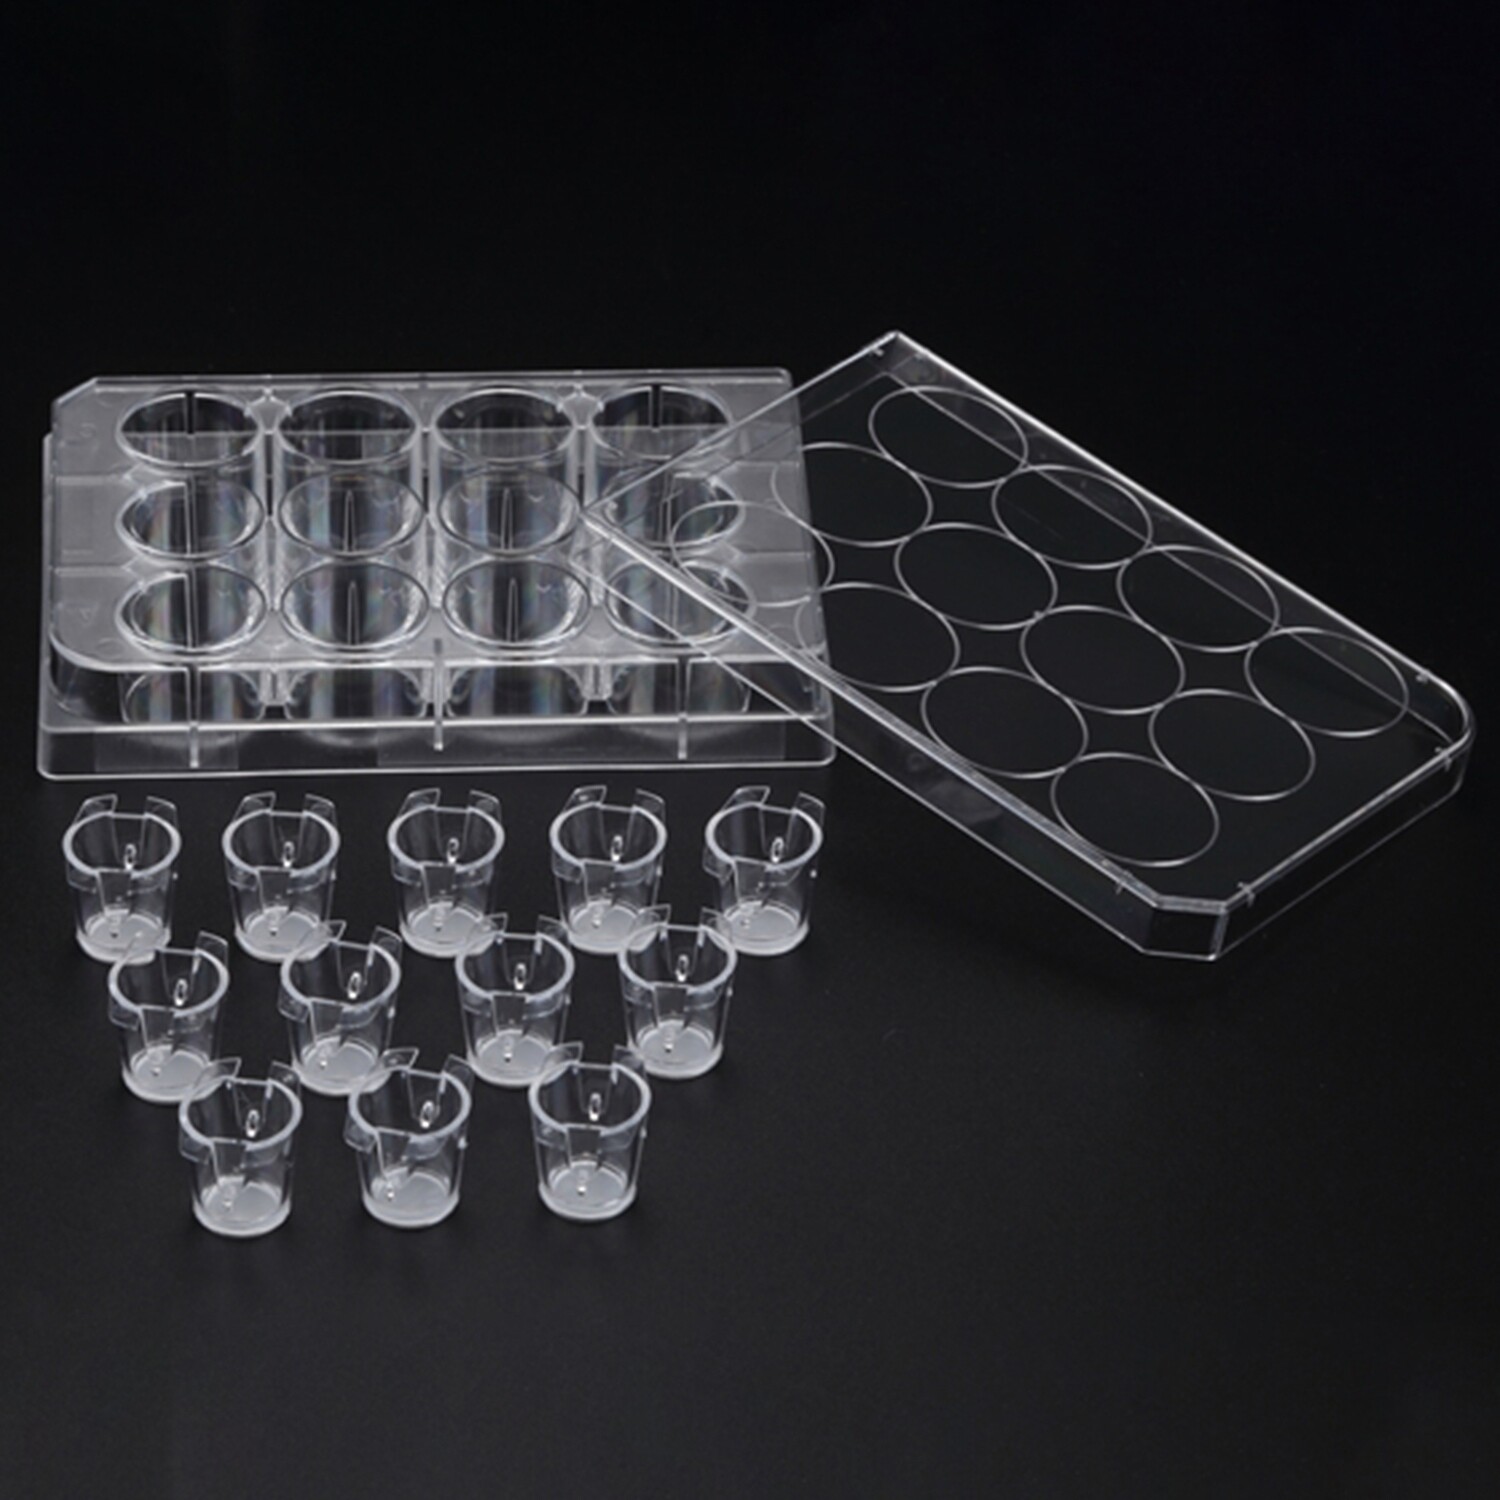 Biologix Insert™ Hanging, 12 Cell Culture Inserts+ 12 well plate, PC Membrance, 3/8μm, Transparent, Sterile, 12 Inserts/Pack, 48 Inserts/Case